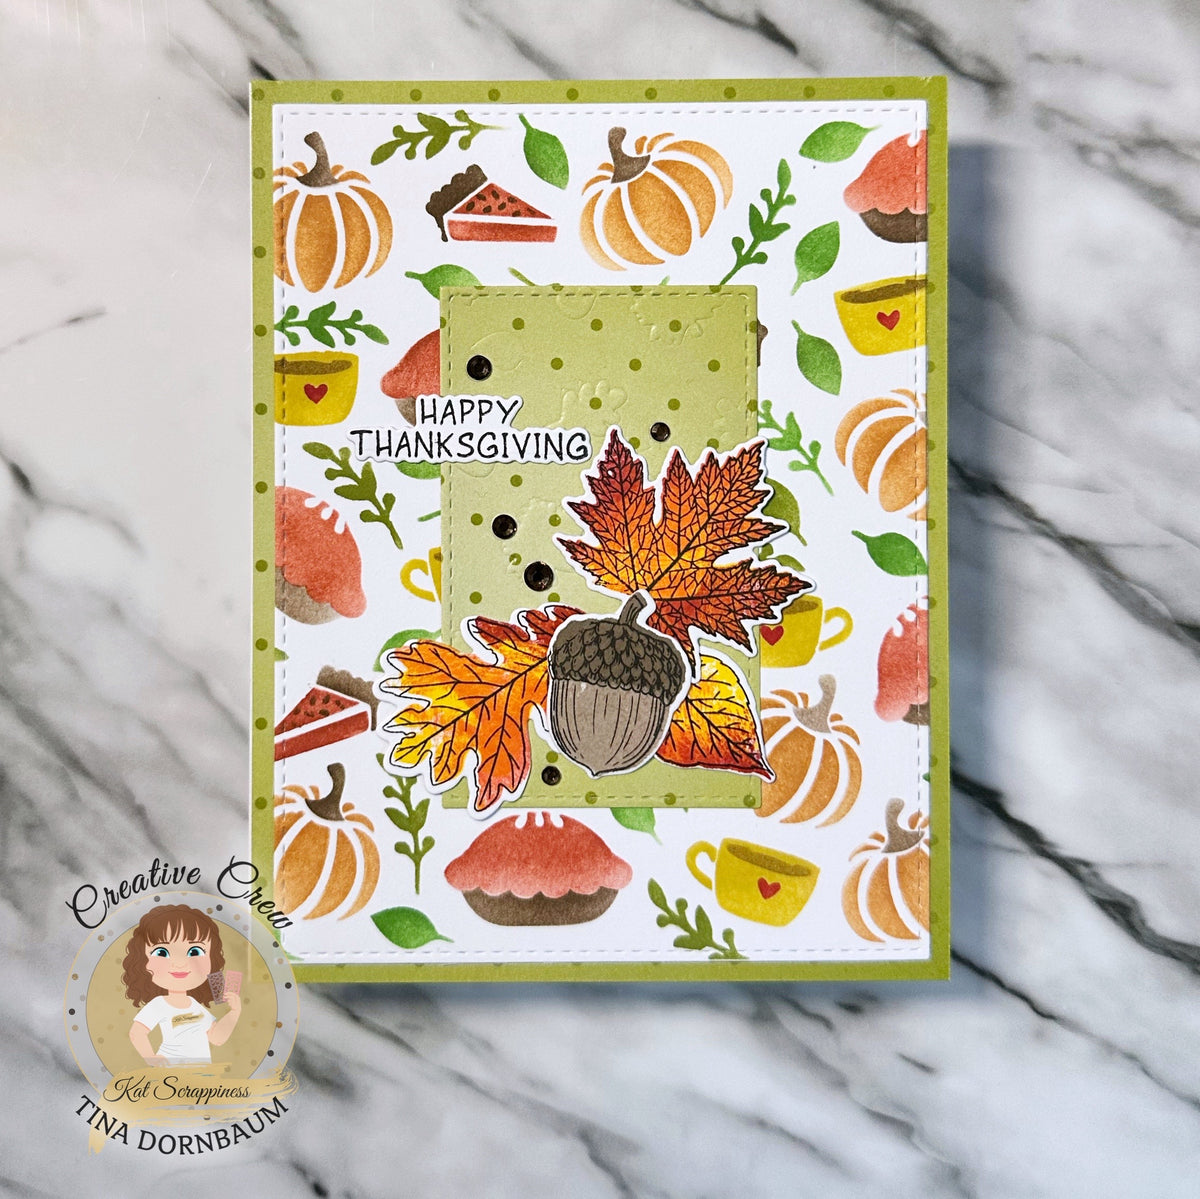 Layered Autumn Leaves Coordinating Craft Dies - New Release